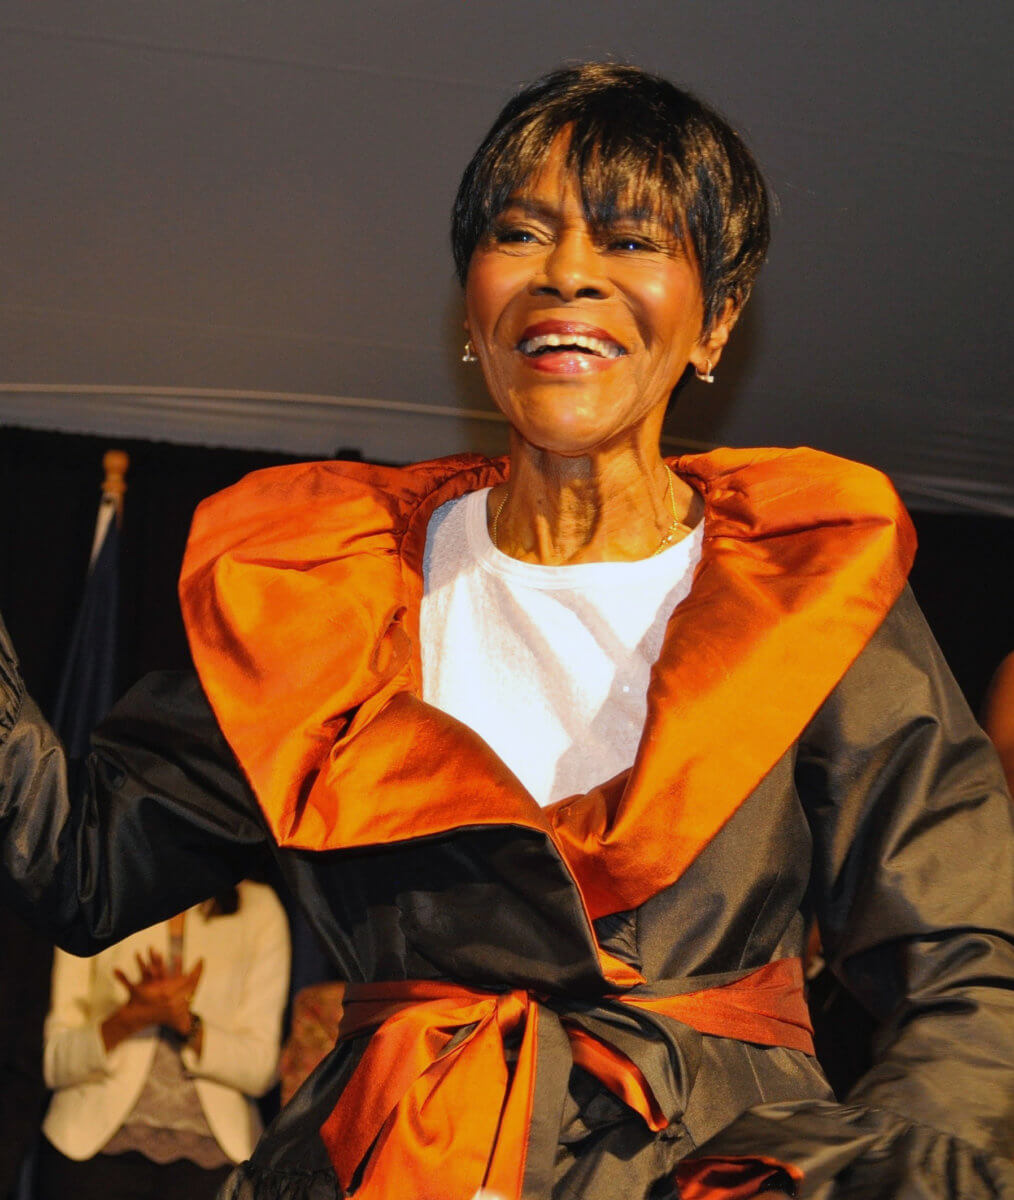 caribbean-mourns-loss-cicely-tyson-2021-02-05-tc-cl01